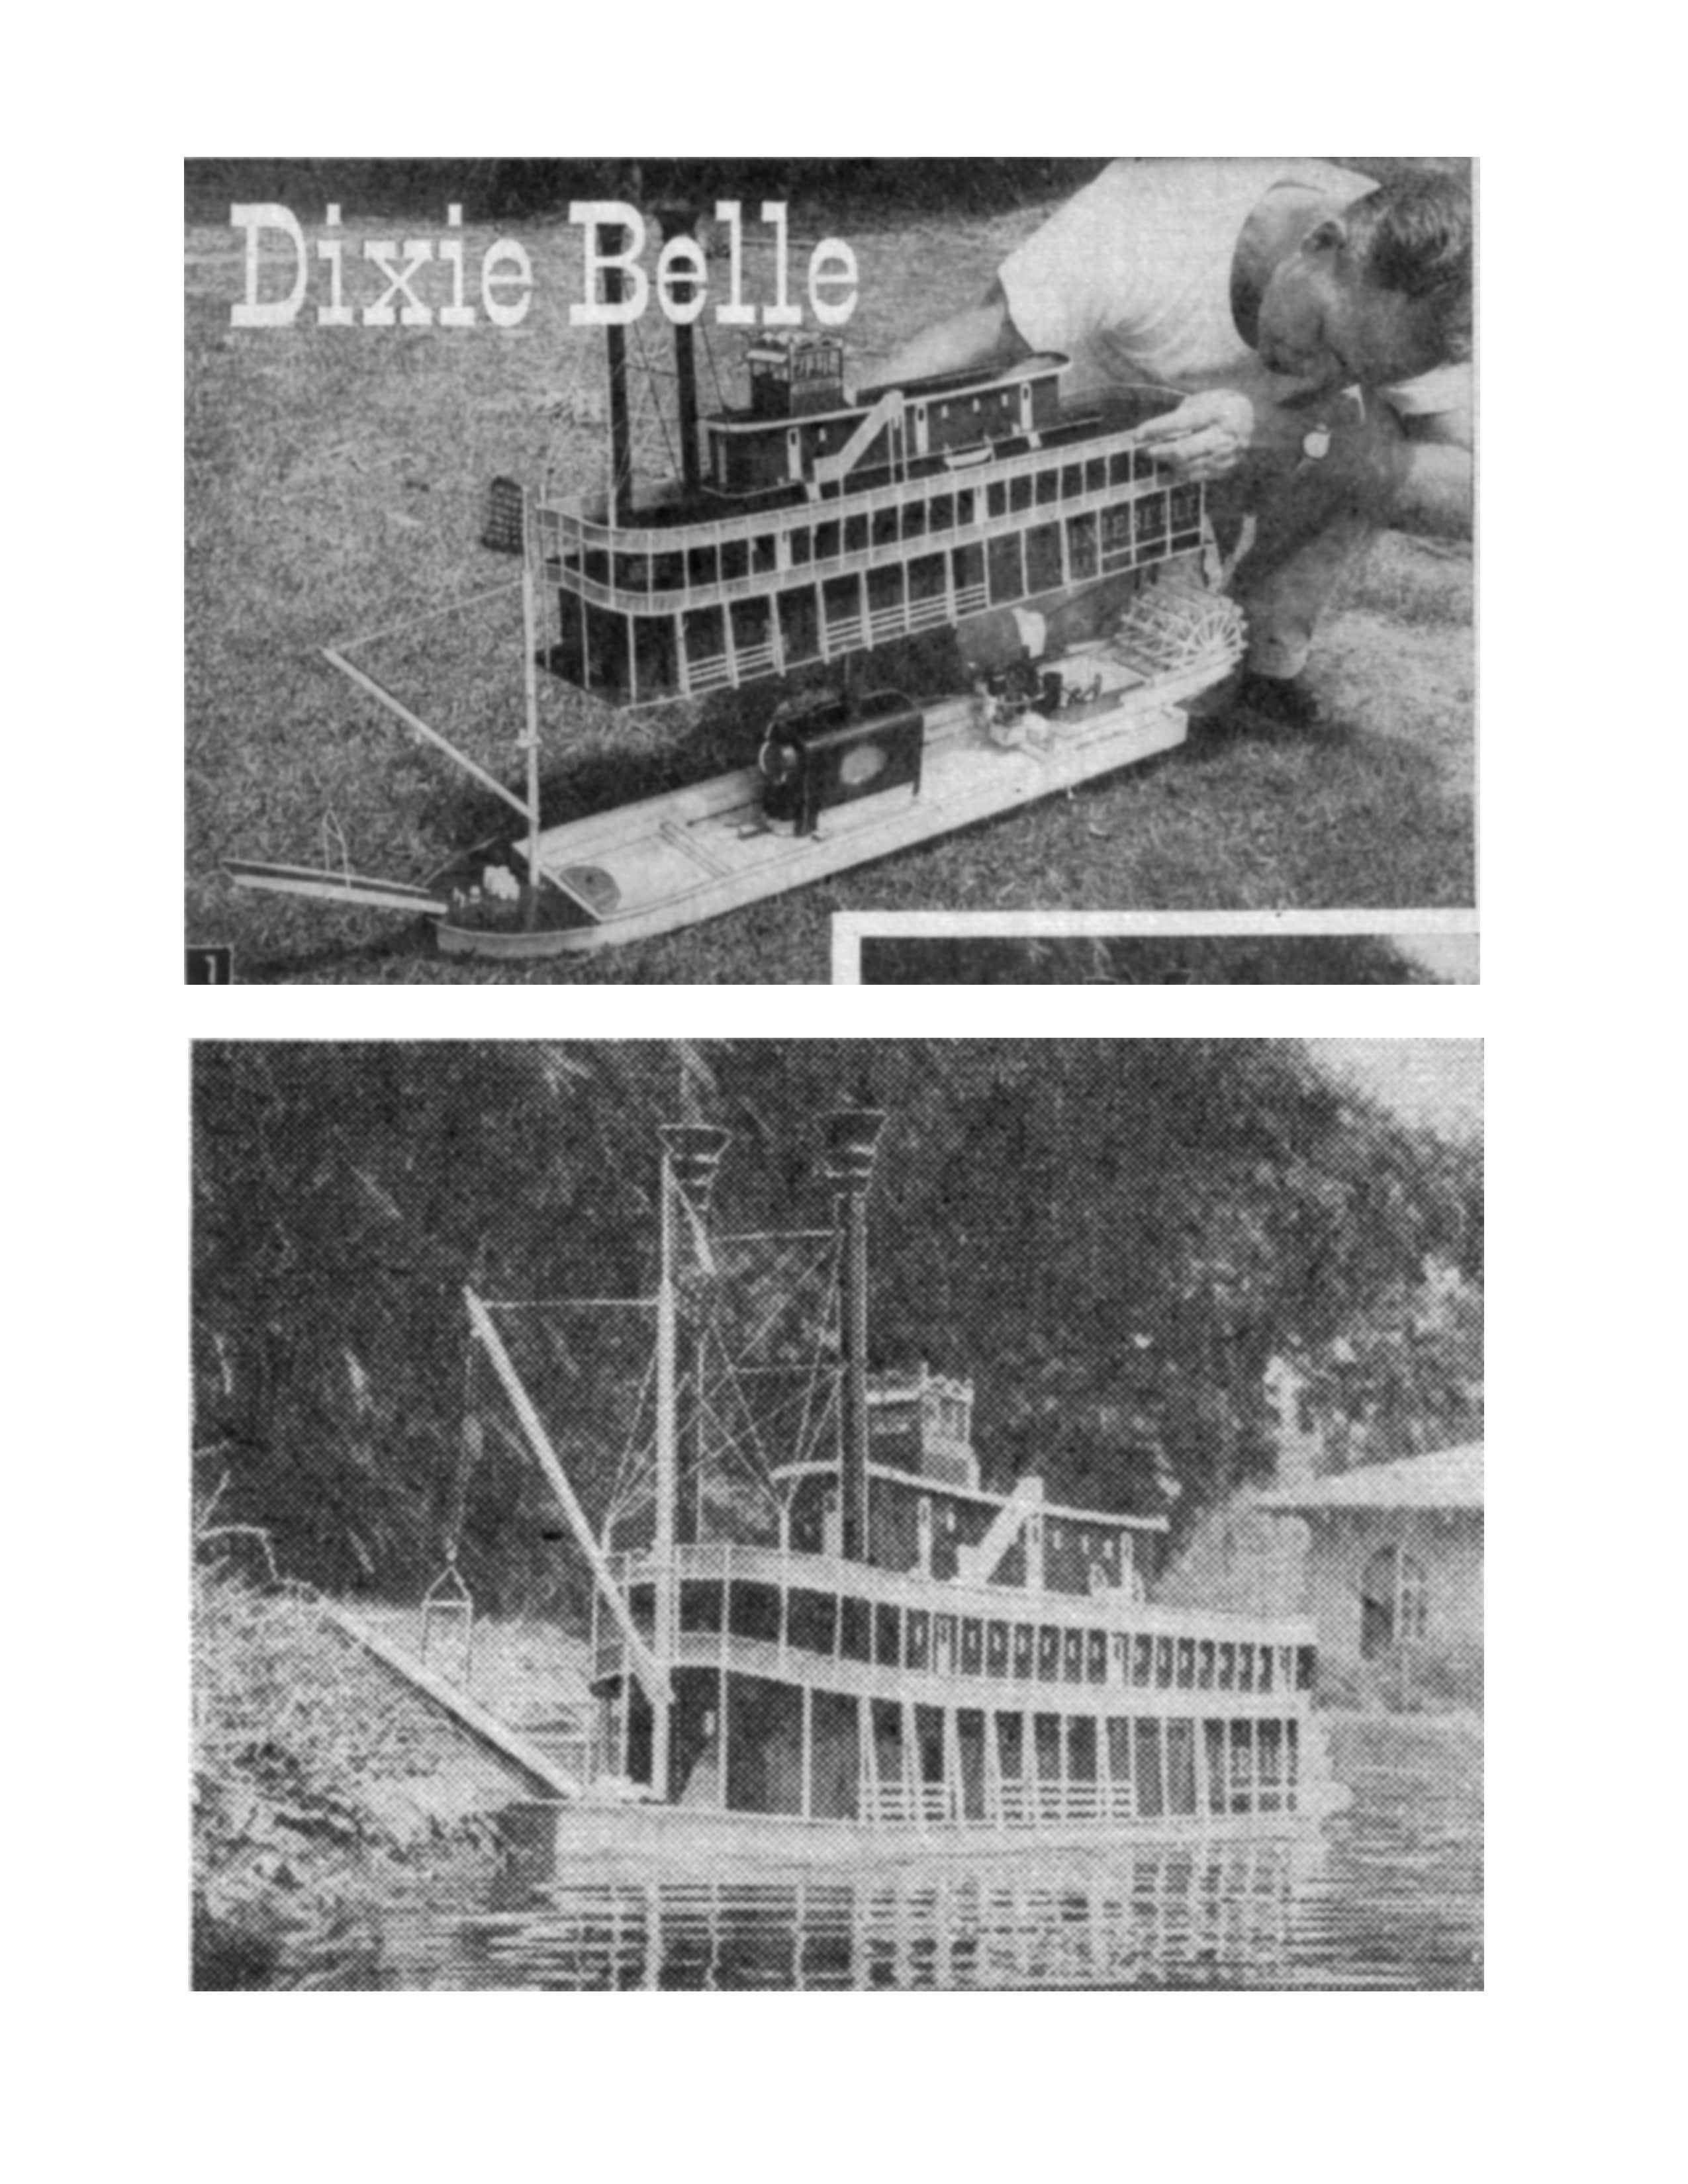 full size printed plans scale 1:48 mississippi river stern wheeler dixie belle suitable for radio control